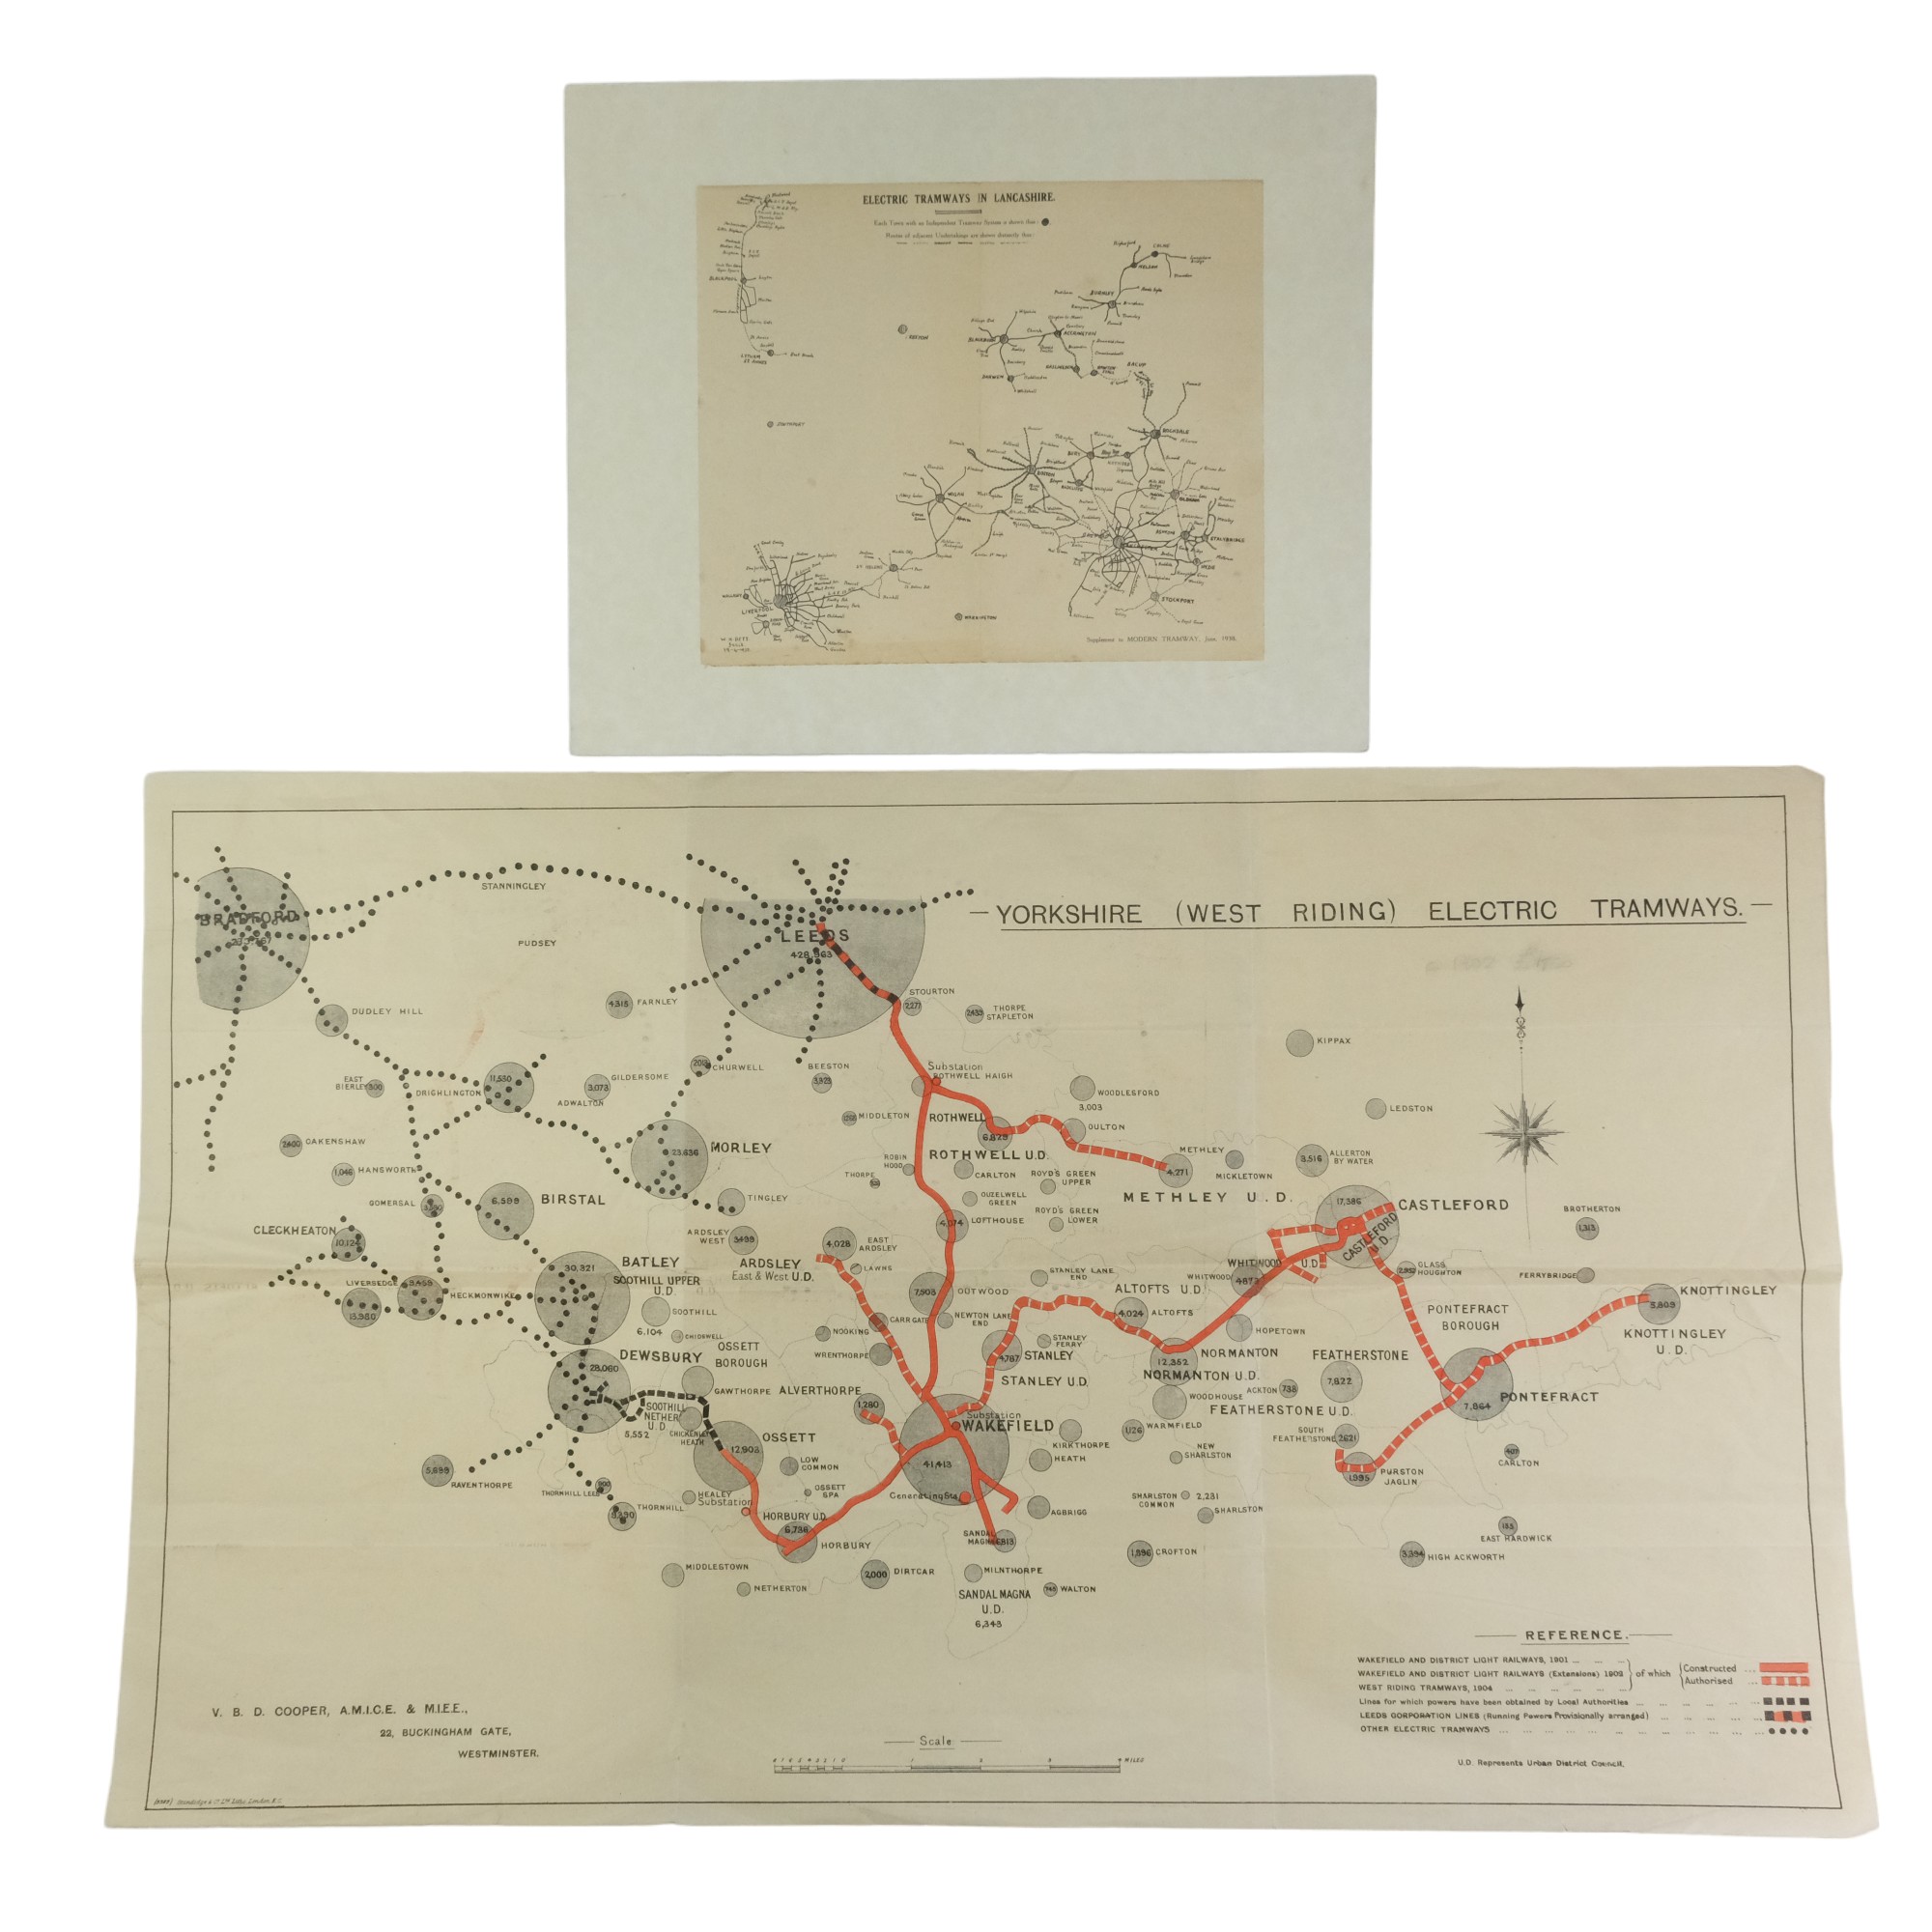 Two early-to-mid 20th Century maps of Electric Tramways in Lancashire and Yorkshire, lithographic